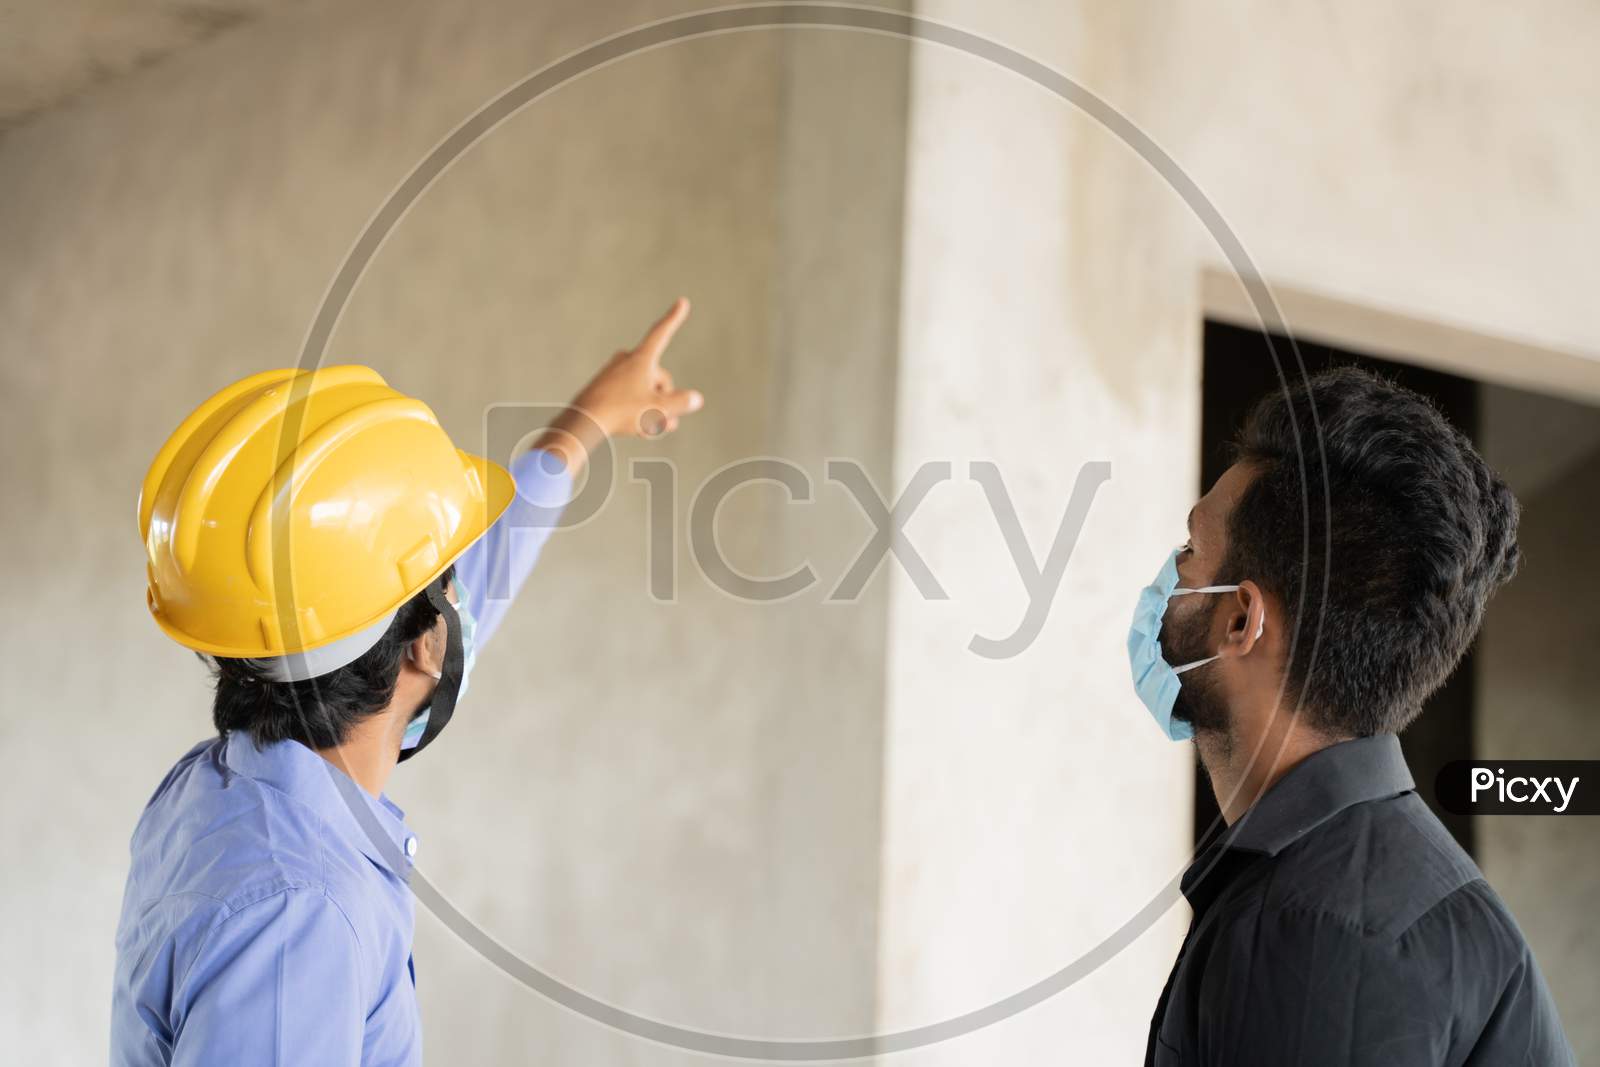 Two Construction Worker In Medical Mask Busy In Work While Maintaining Social Distancing - Concept Of Covid-19 Or Coronavirus Safety Measures At Work Place.